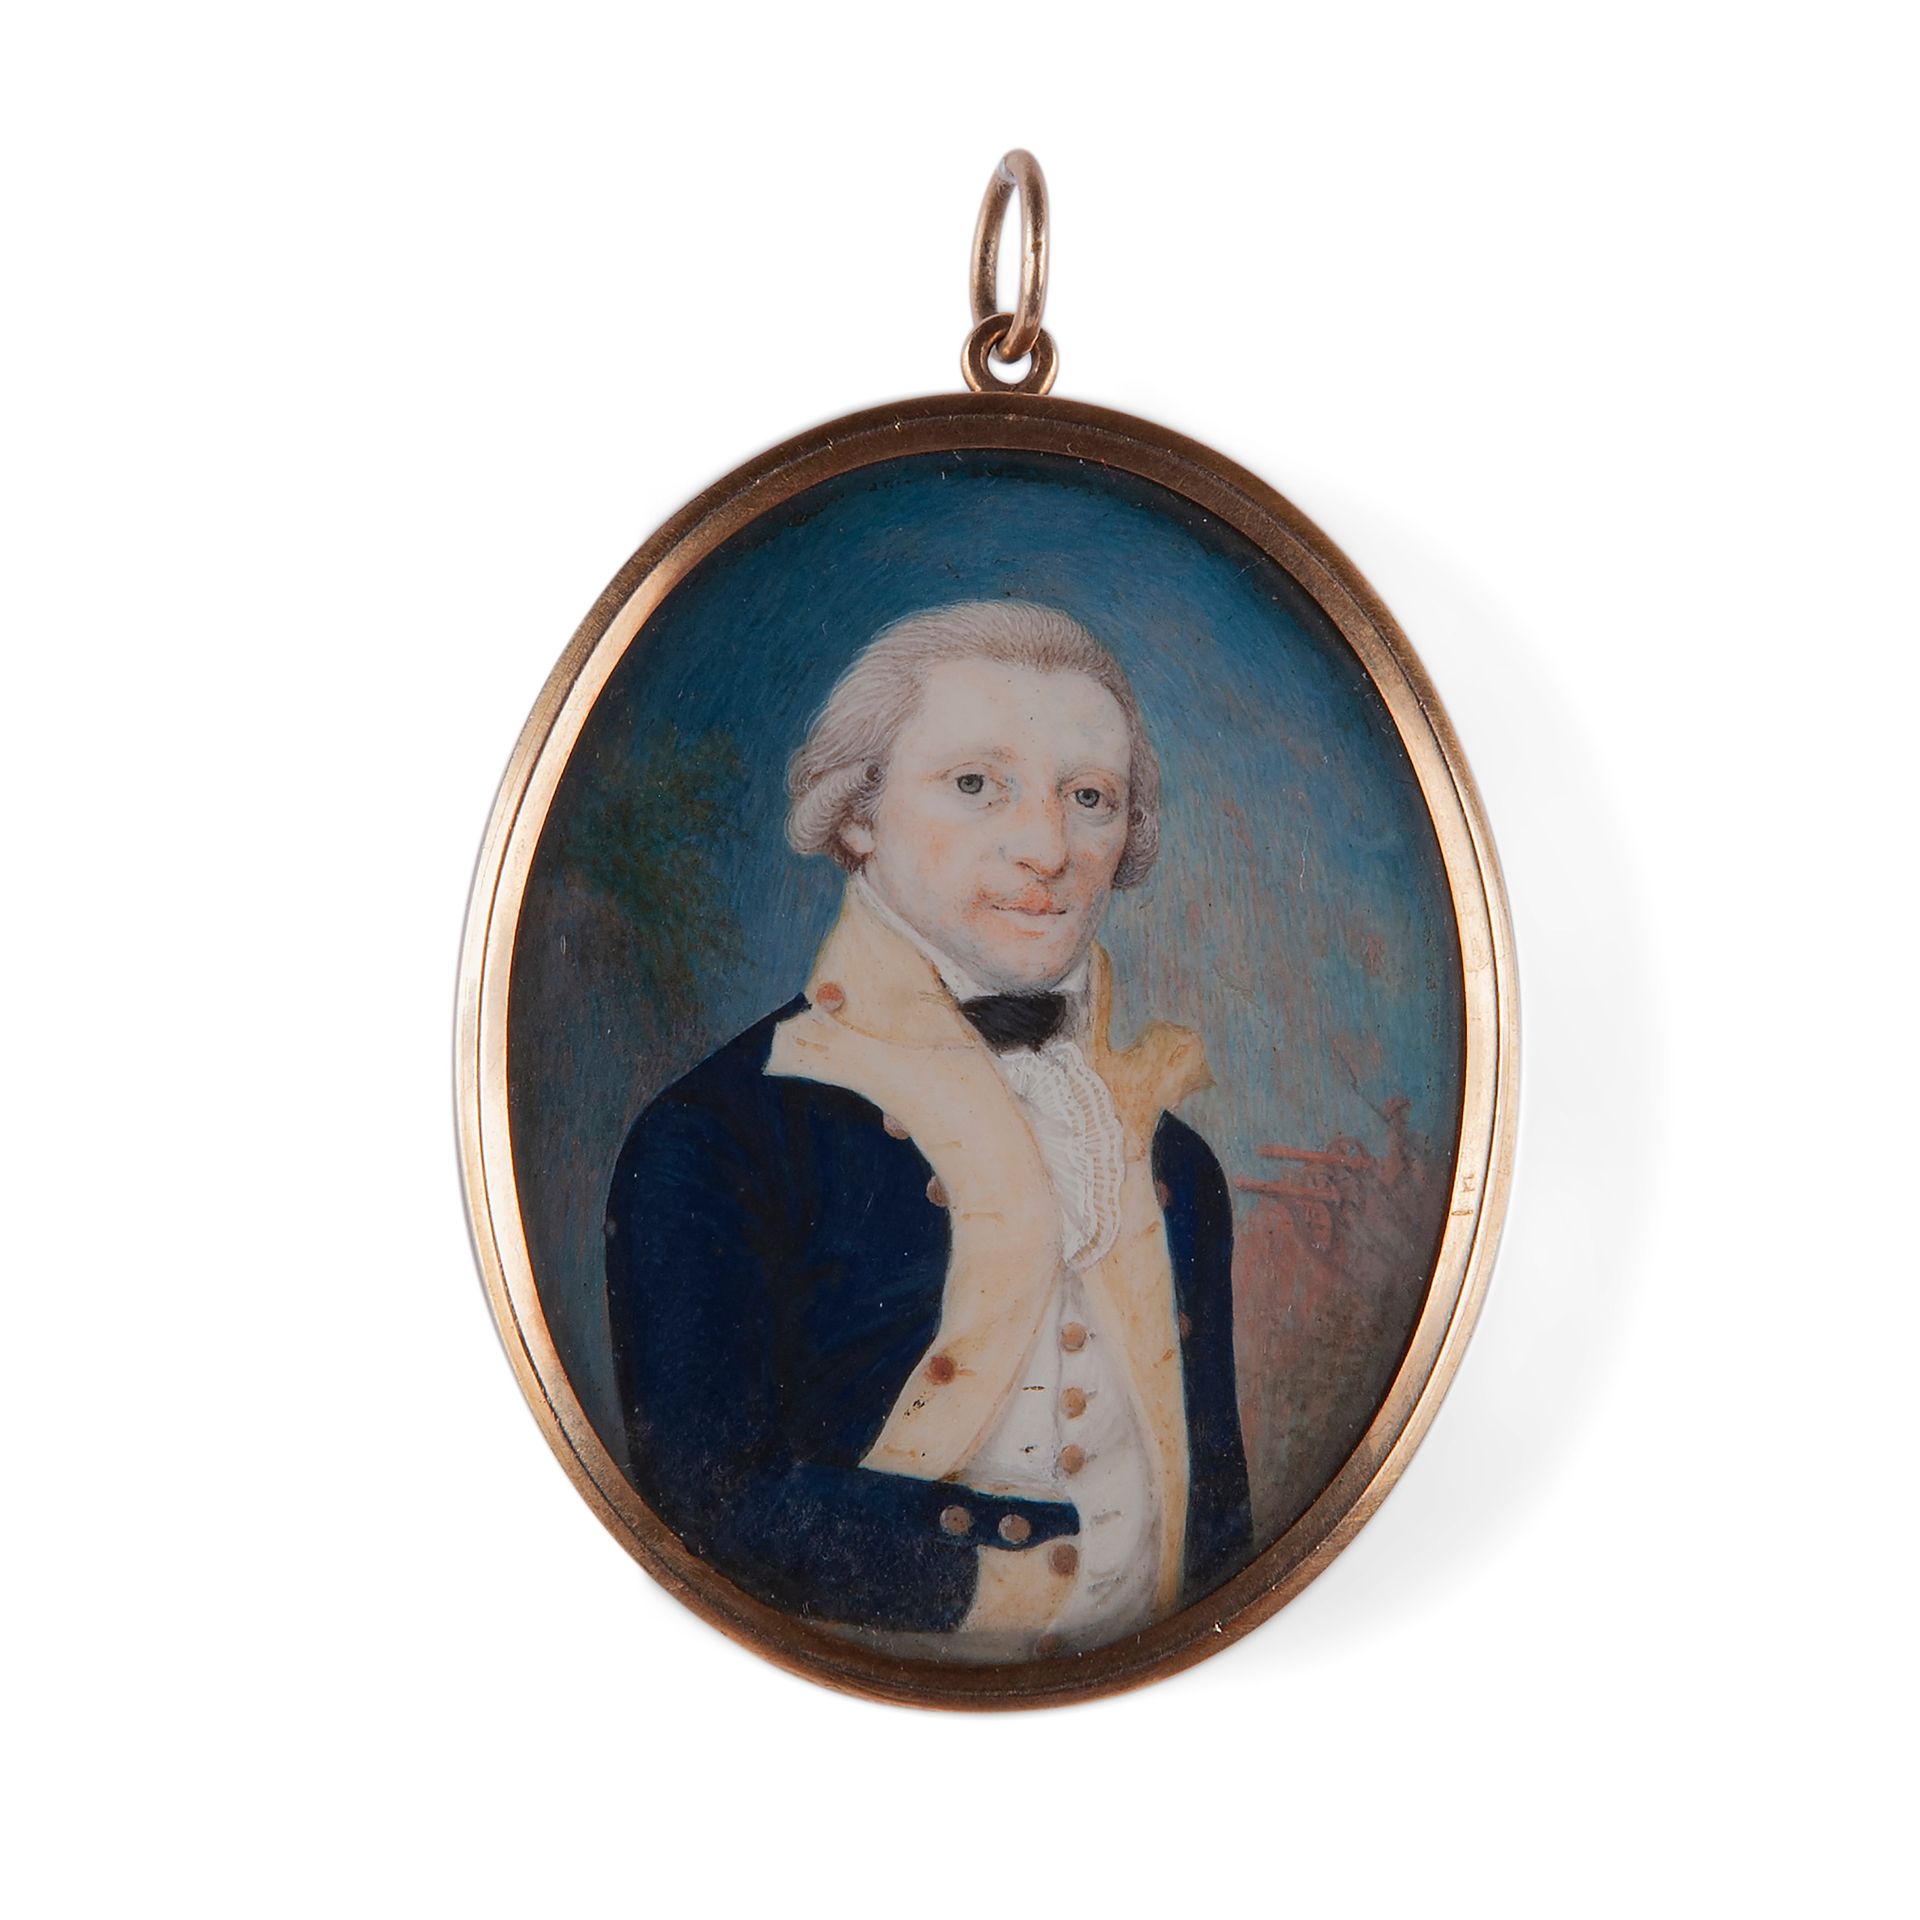 Miniature portrait of an official, England late 18th century Ritratto in miniatu&hellip;